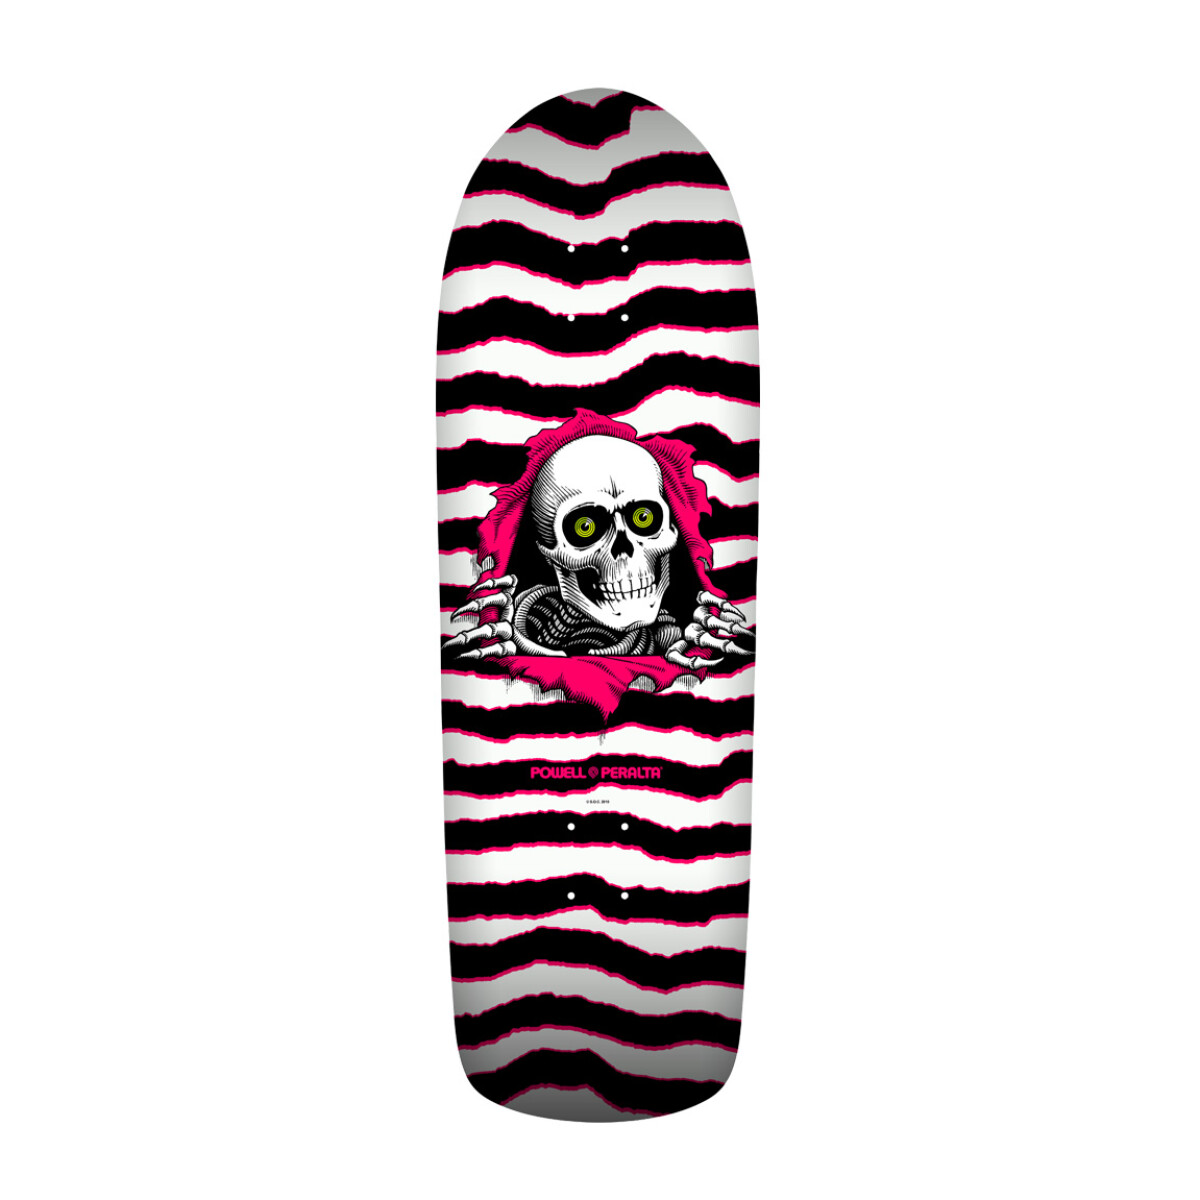 Deck Powell Peralta Old School Ripper - White/Pink - 9.89 x 31.32" 